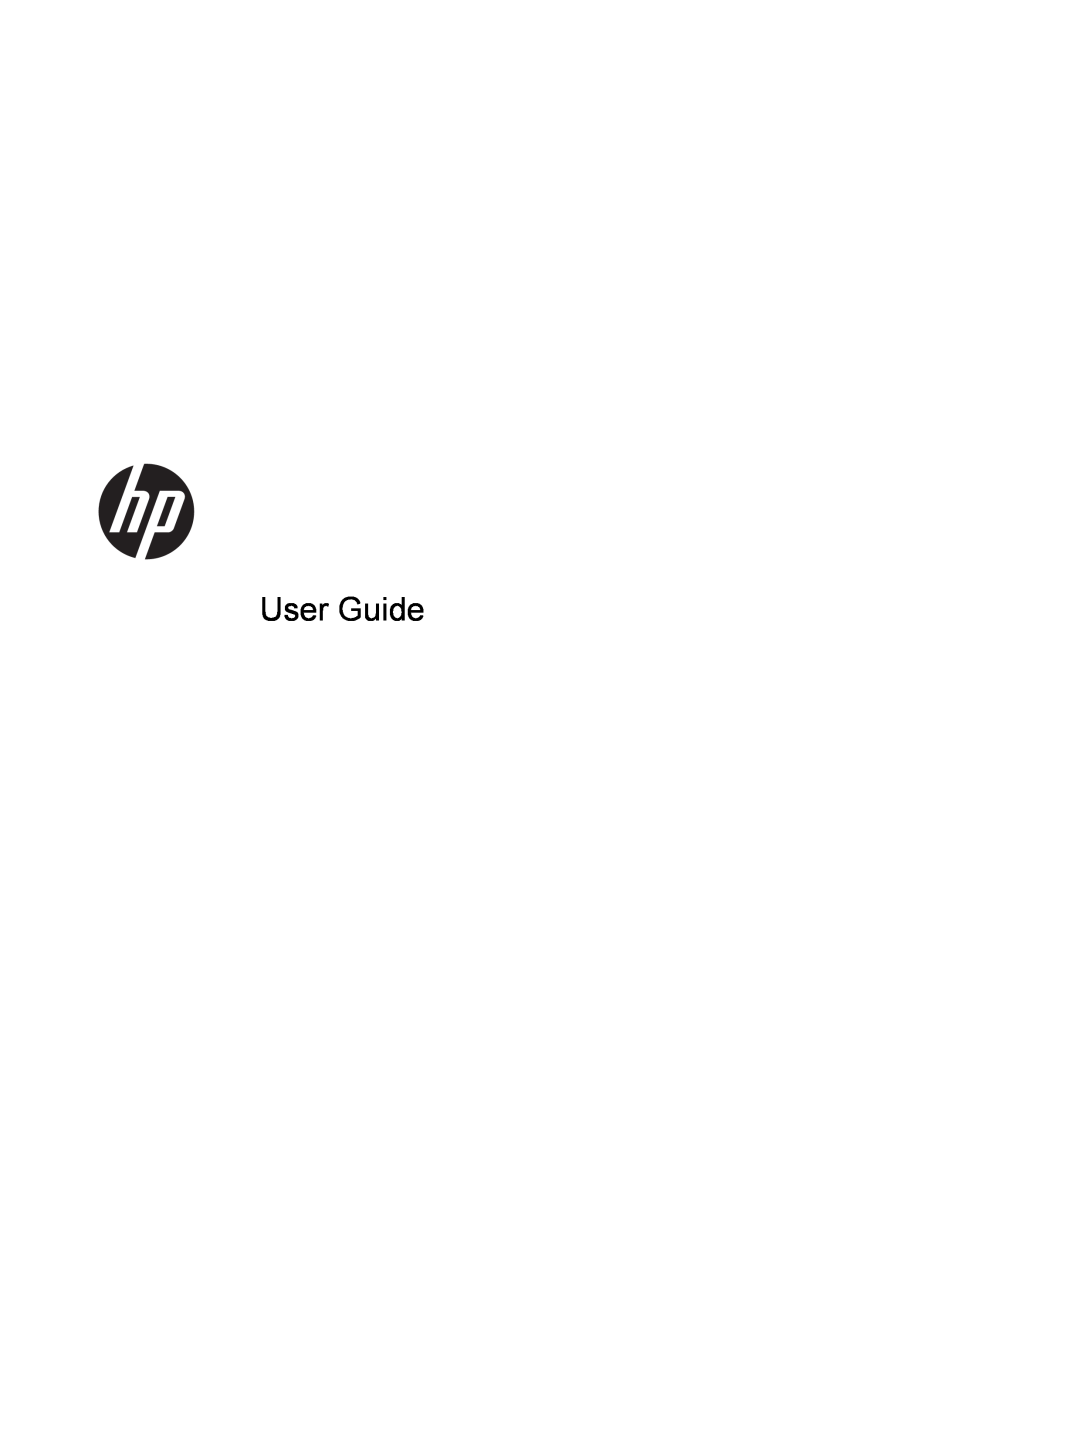 HP 900 G1 D3H86UT#ABA, 900 G1 D3H88UT#ABA, 900 G1 D3H87UT, D3H85UTABA, 900 G1 D4T09AW#ABA manual User Guide 